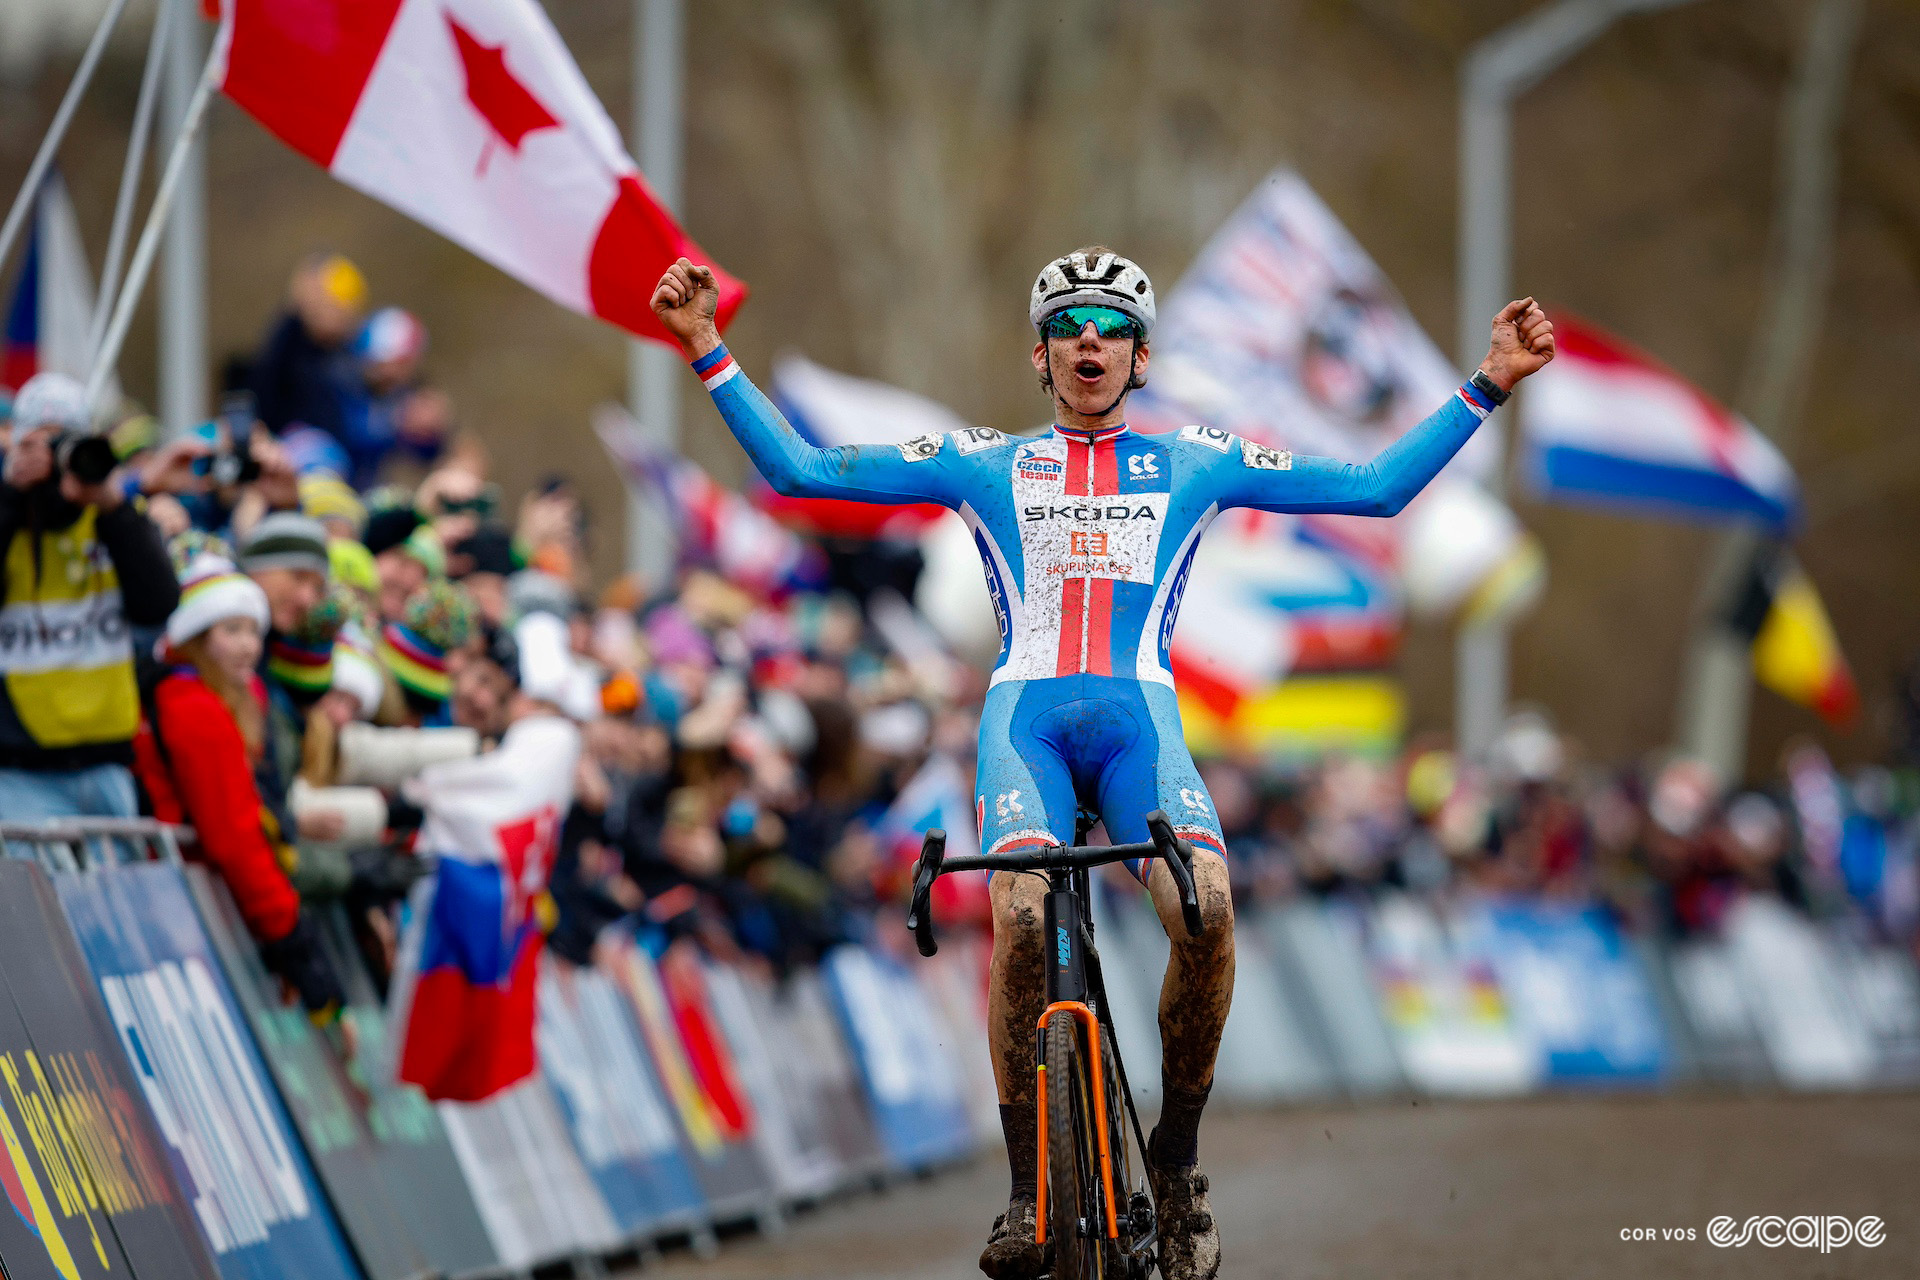 Czech junior rider Kryštof Bažant celebrates winning the bronze medal on the finishing straight in front of an enthusiastic home crowd at the 2024 Cyclocross World Championships in Tábor.